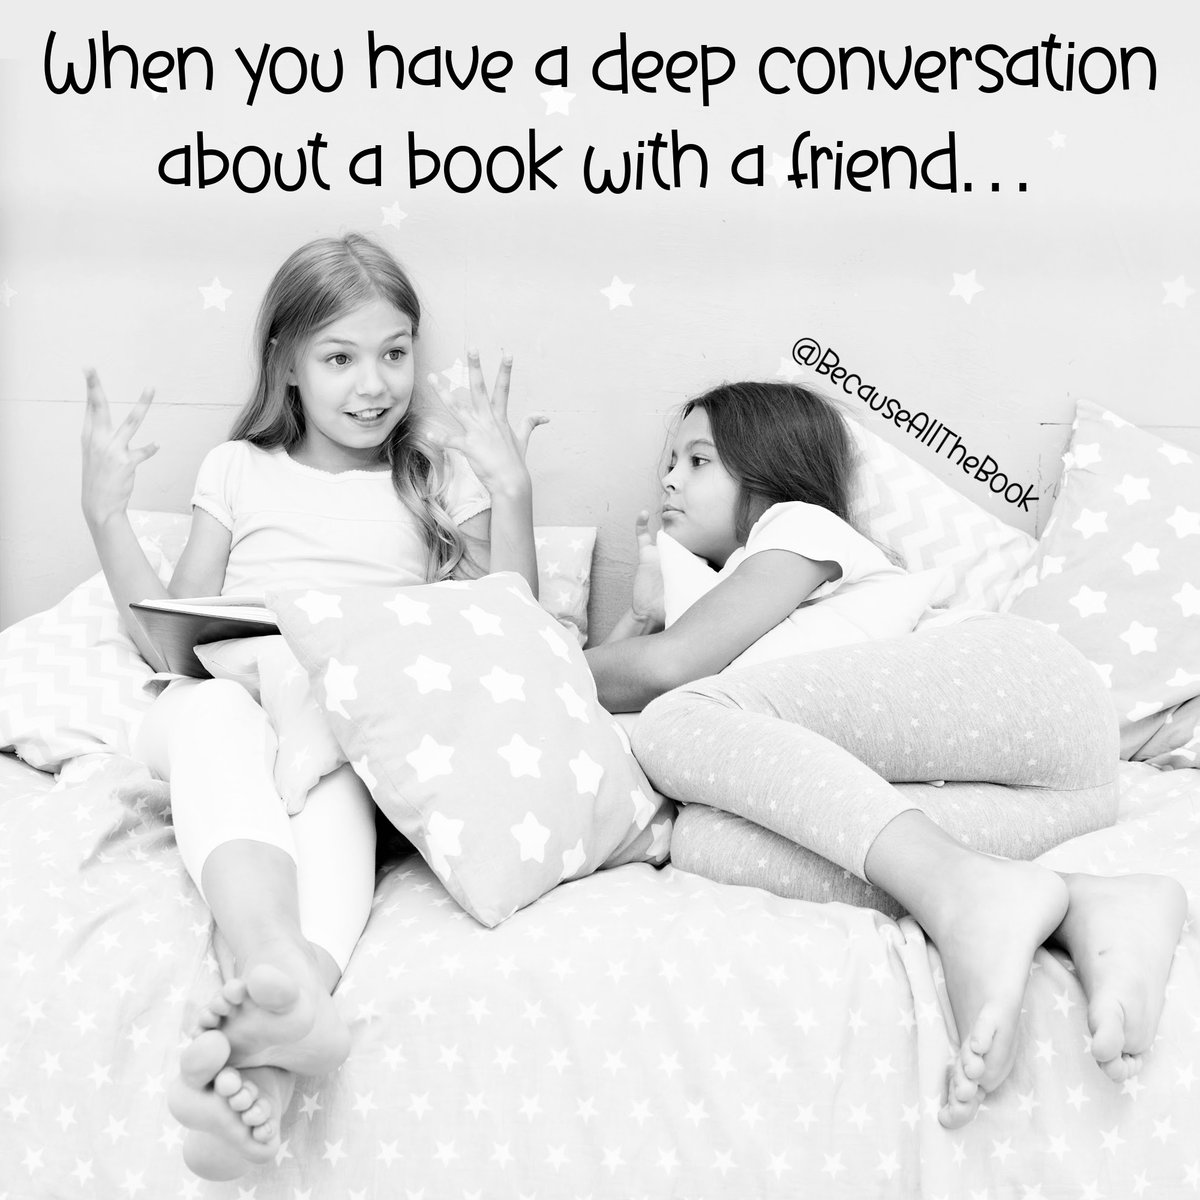 I love chatting with friends about books!

#BecauseAllTheBooks #BookFriends #ReadingFriends #BookTalk